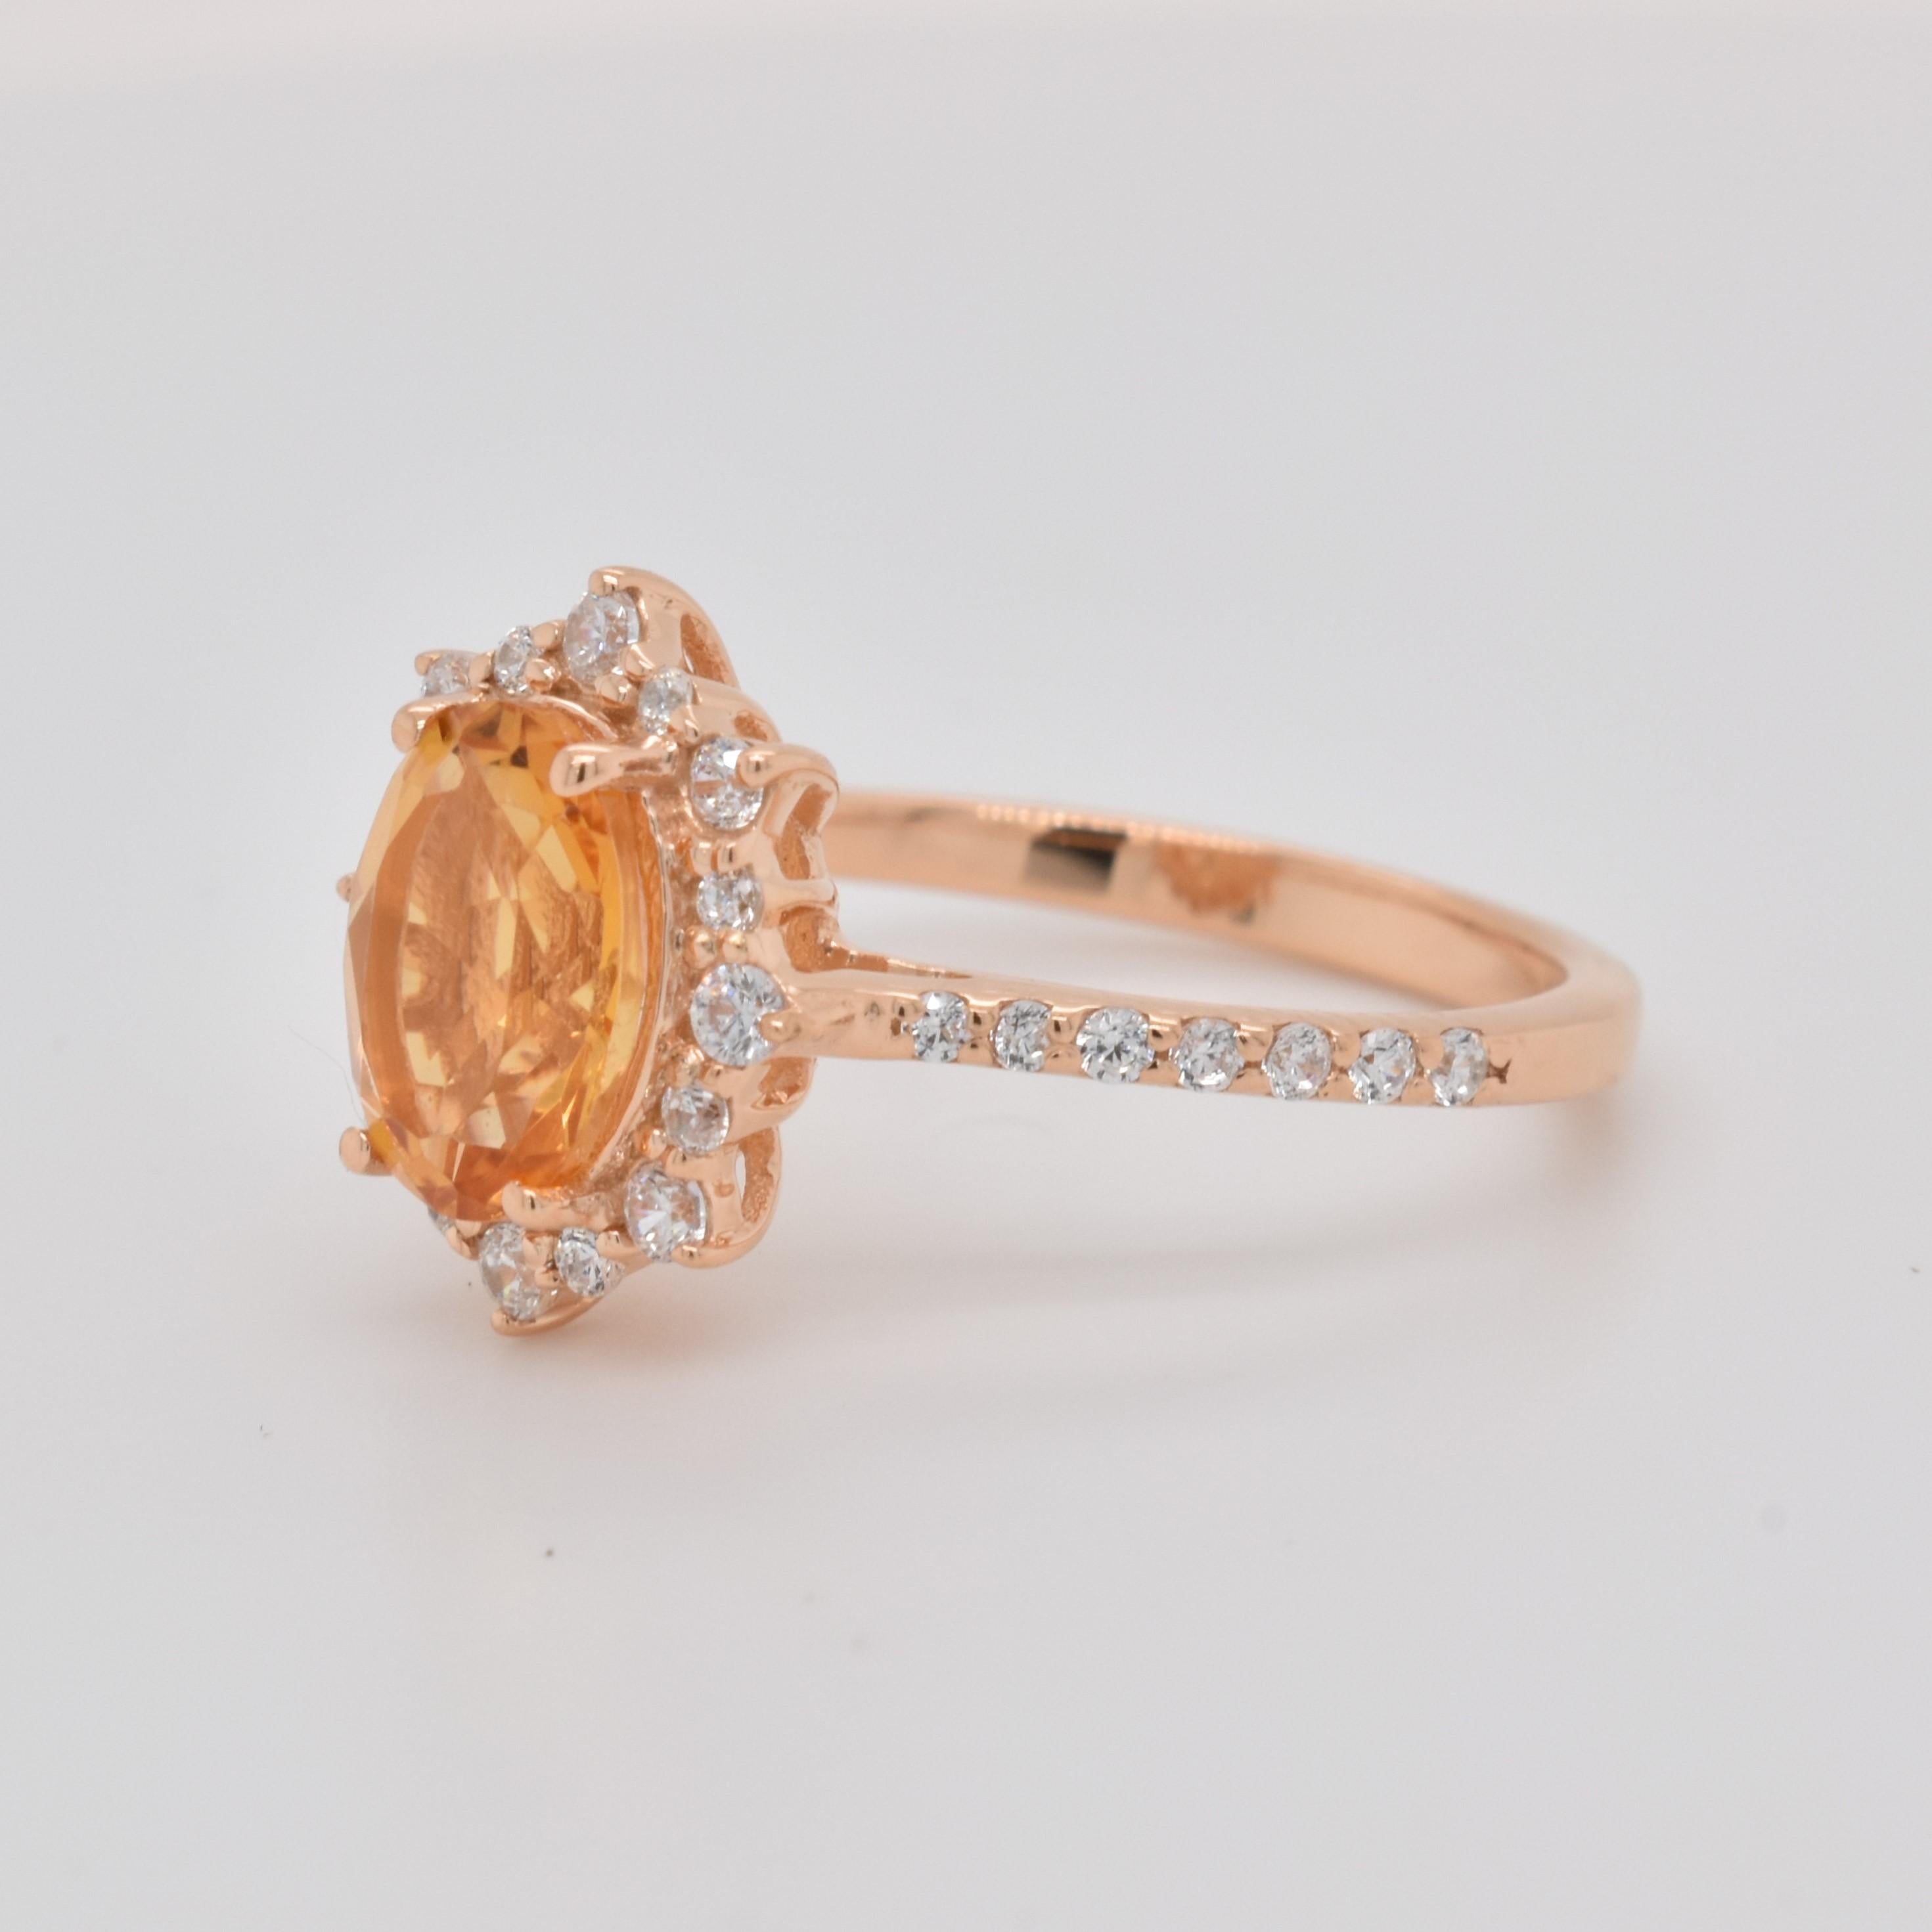 Rose gold plated solid silver natural oval citrine gemstone ring beautifully crafted in a halo design with CZ to finish its look. A November Birthstone Ring. Engagement and propose Ring!!